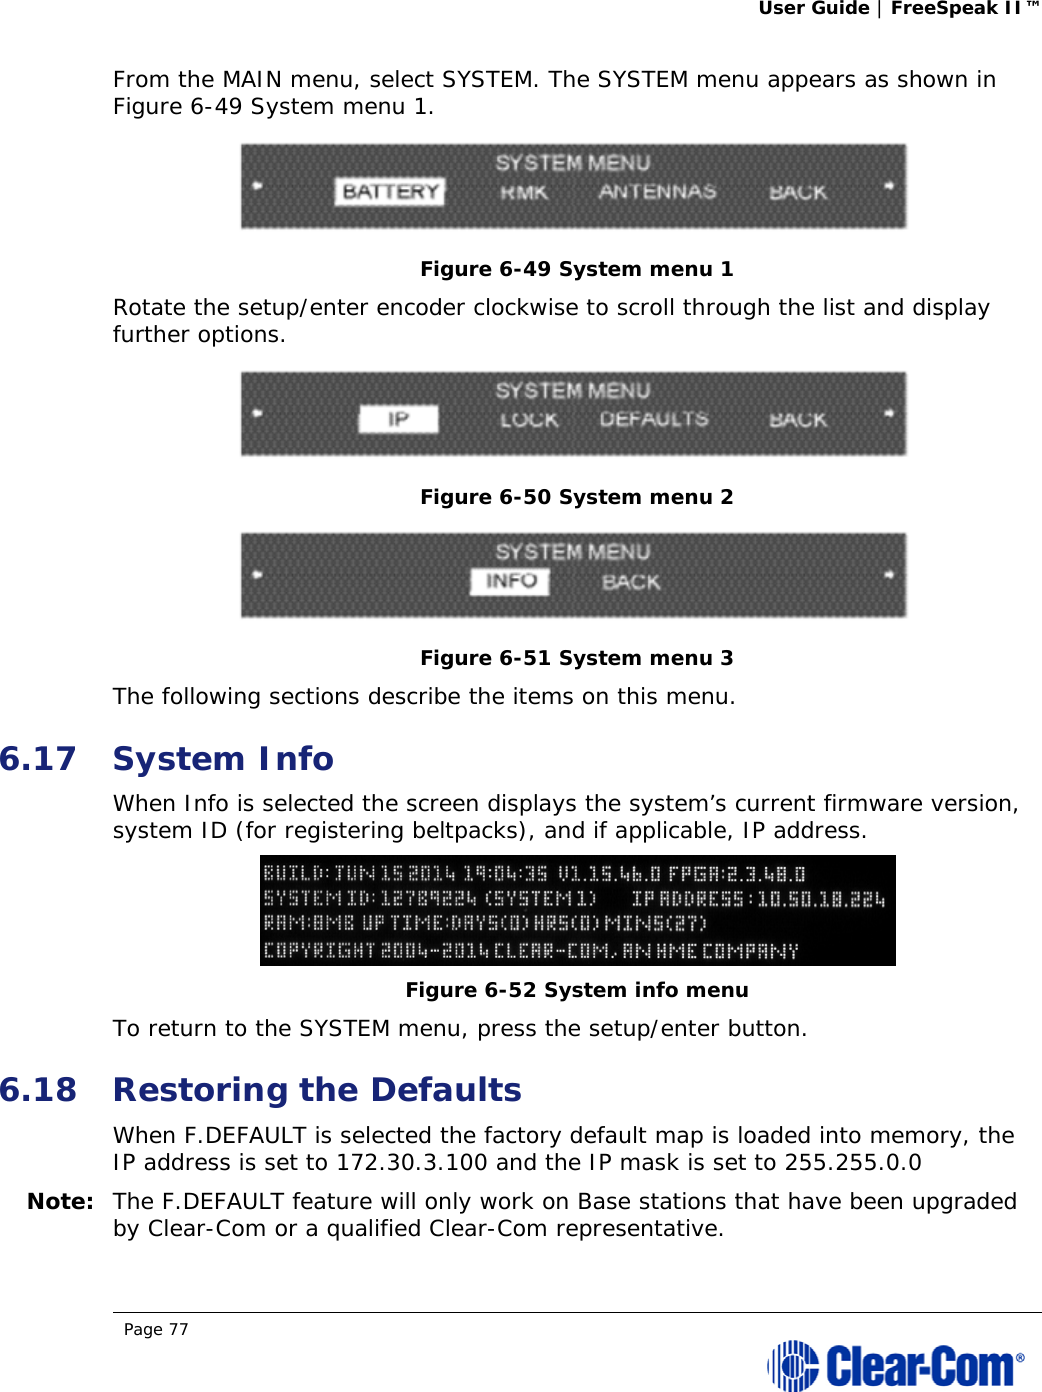 User Guide | FreeSpeak II™  Page 77  From the MAIN menu, select SYSTEM. The SYSTEM menu appears as shown in Figure 6-49 System menu 1.  Figure 6-49 System menu 1 Rotate the setup/enter encoder clockwise to scroll through the list and display further options.  Figure 6-50 System menu 2  Figure 6-51 System menu 3 The following sections describe the items on this menu.  6.17 System Info When Info is selected the screen displays the system’s current firmware version, system ID (for registering beltpacks), and if applicable, IP address.  Figure 6-52 System info menu To return to the SYSTEM menu, press the setup/enter button.  6.18 Restoring the Defaults When F.DEFAULT is selected the factory default map is loaded into memory, the IP address is set to 172.30.3.100 and the IP mask is set to 255.255.0.0 Note: The F.DEFAULT feature will only work on Base stations that have been upgraded by Clear-Com or a qualified Clear-Com representative. 